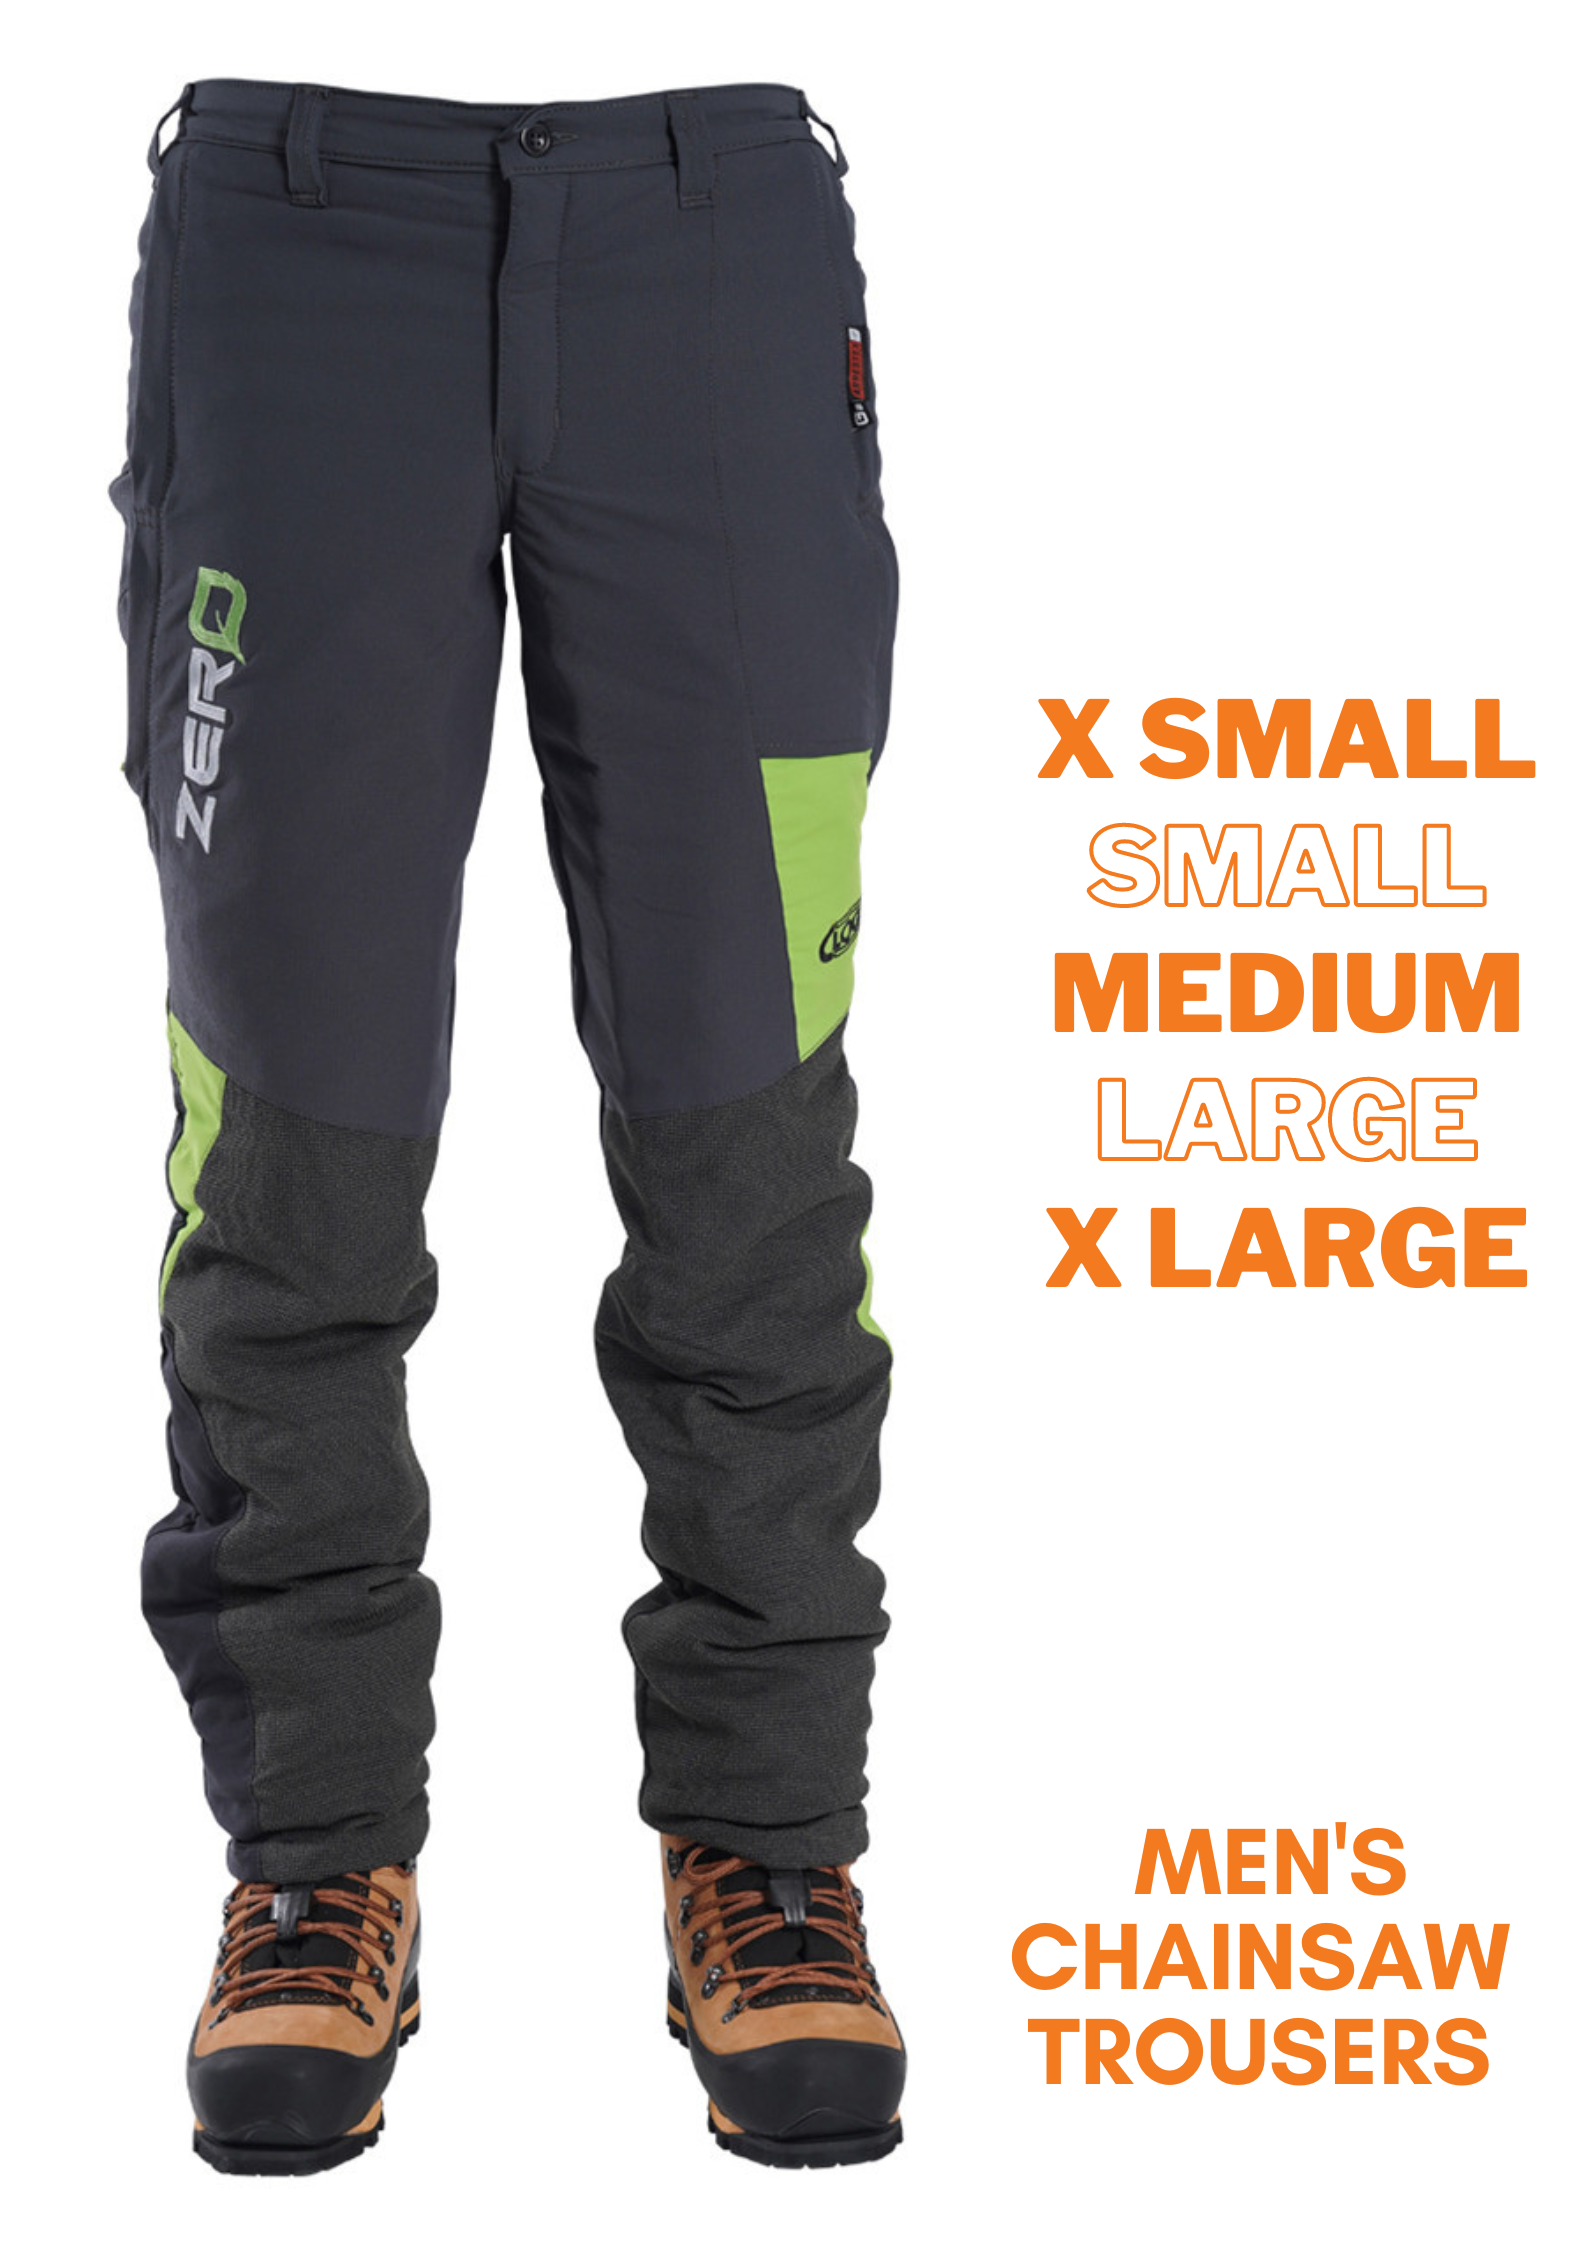 Clogger Zero Gen2 Light and Cool Men's Chainsaw Trousers - Grey